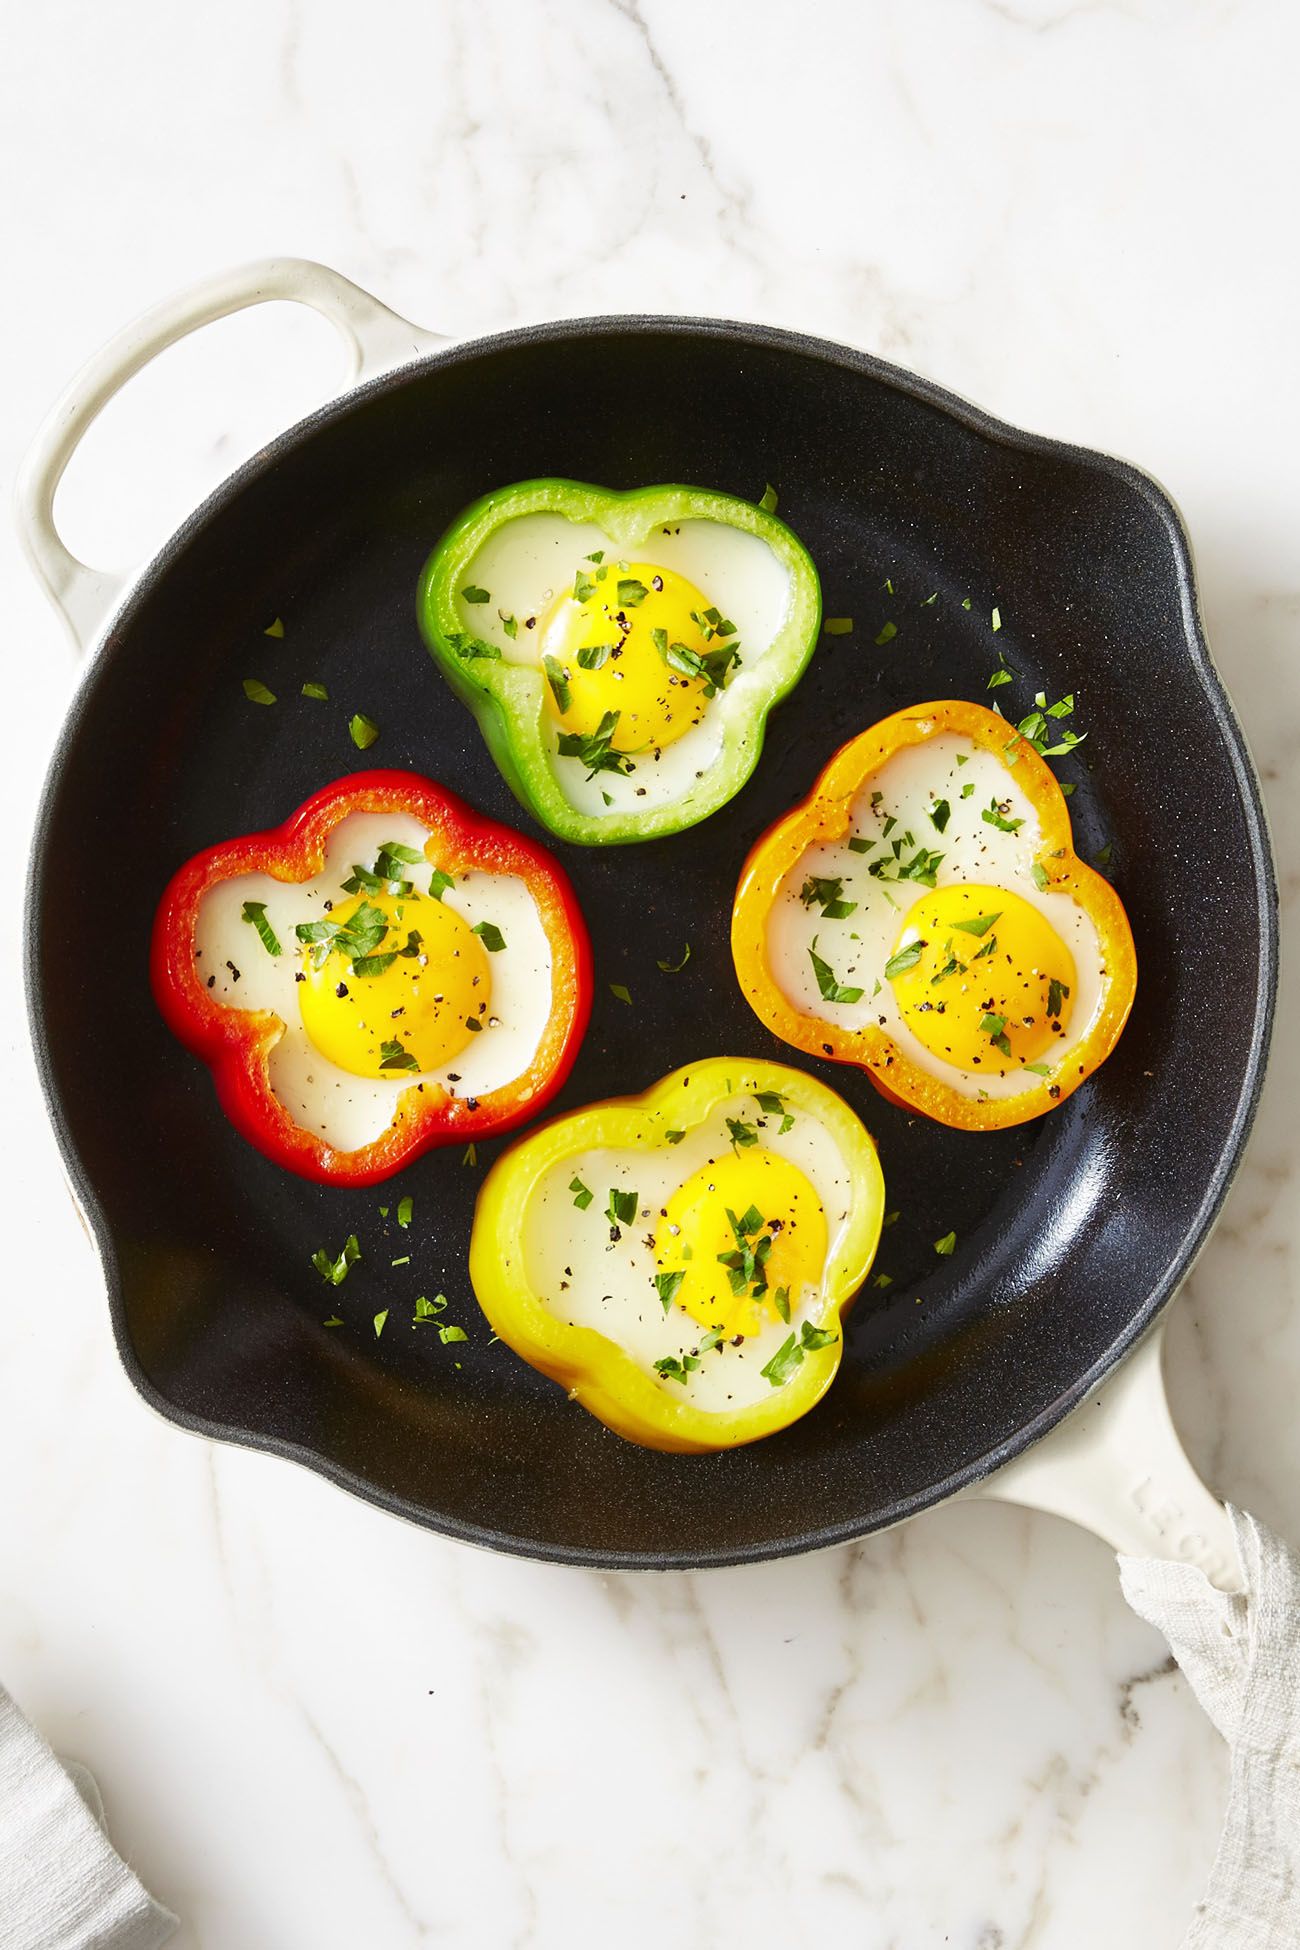 Best Sunny-Side Eggs Recipe - How to Make Sunny Side Up Eggs in Pepper Rings